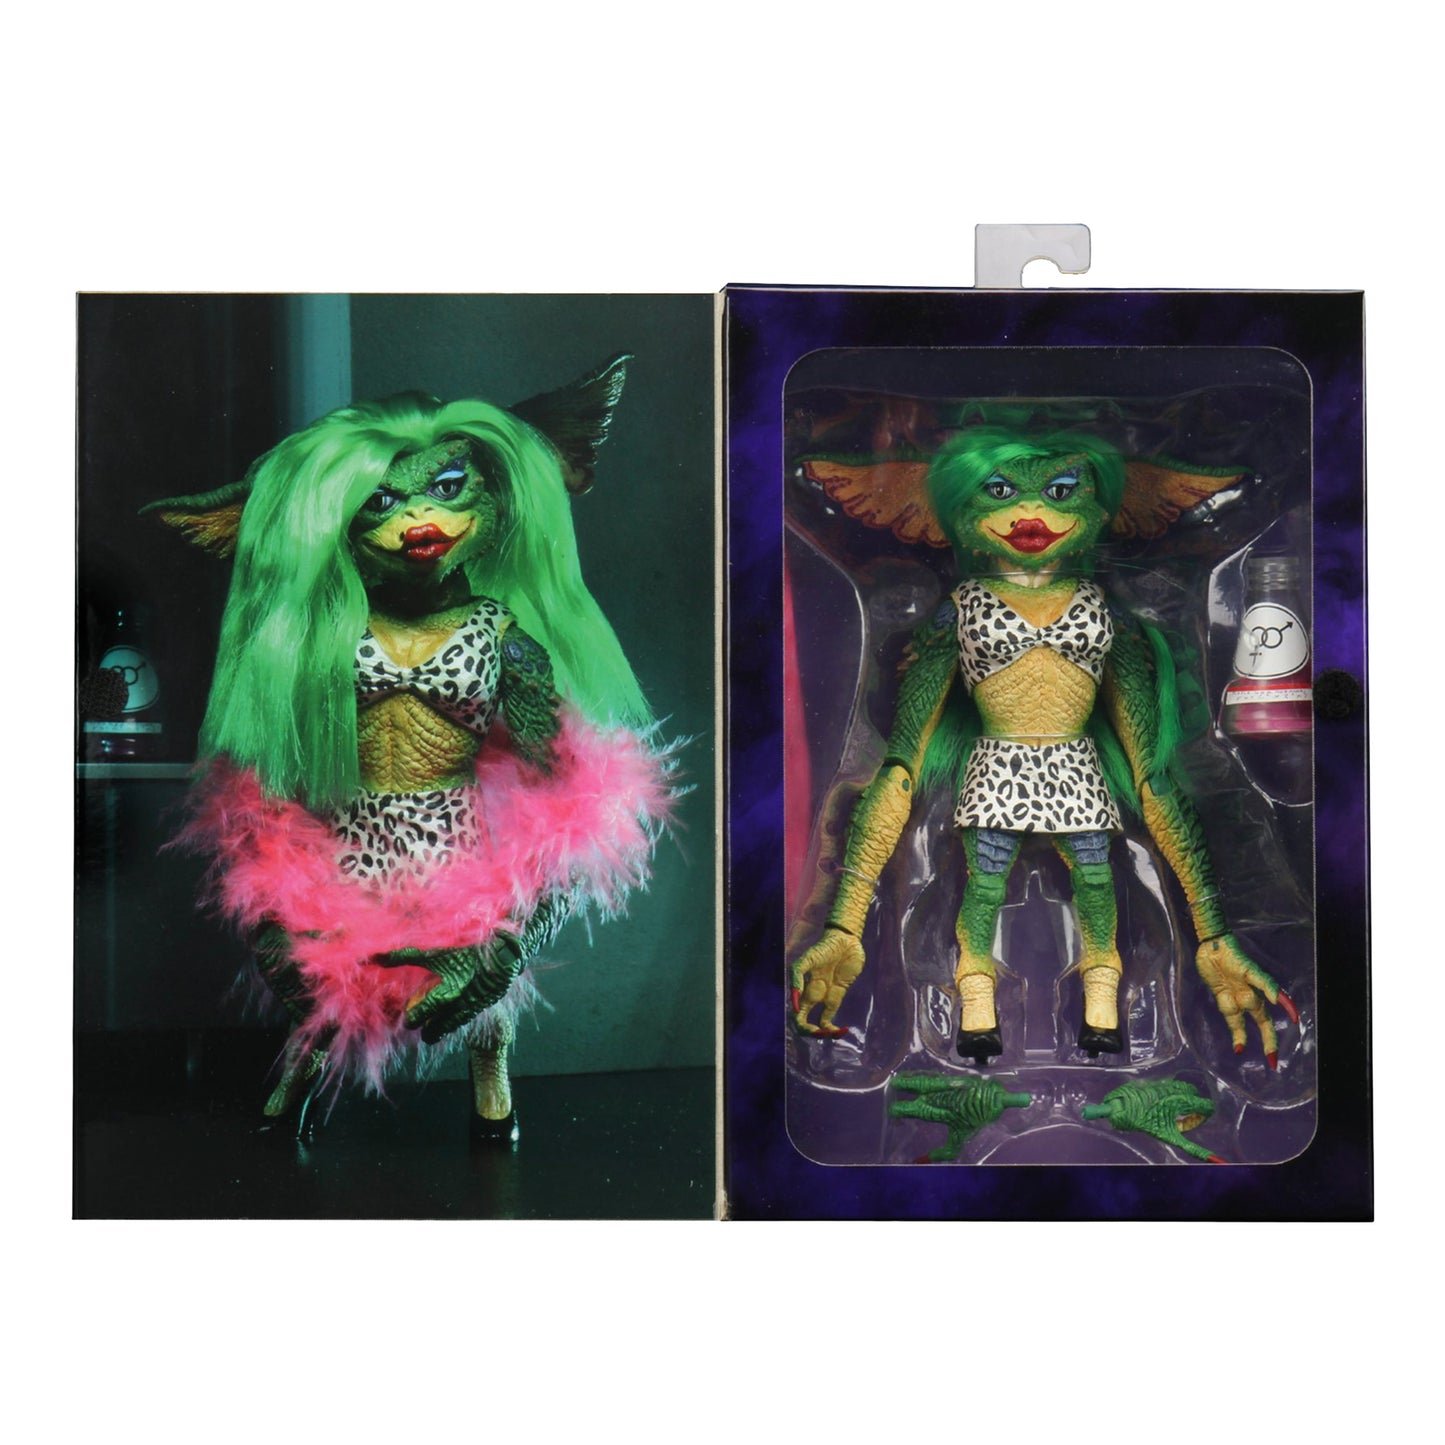 NECA: Gremlins 2 - The New Batch Ultimate Greta 7" Tall Action Figure